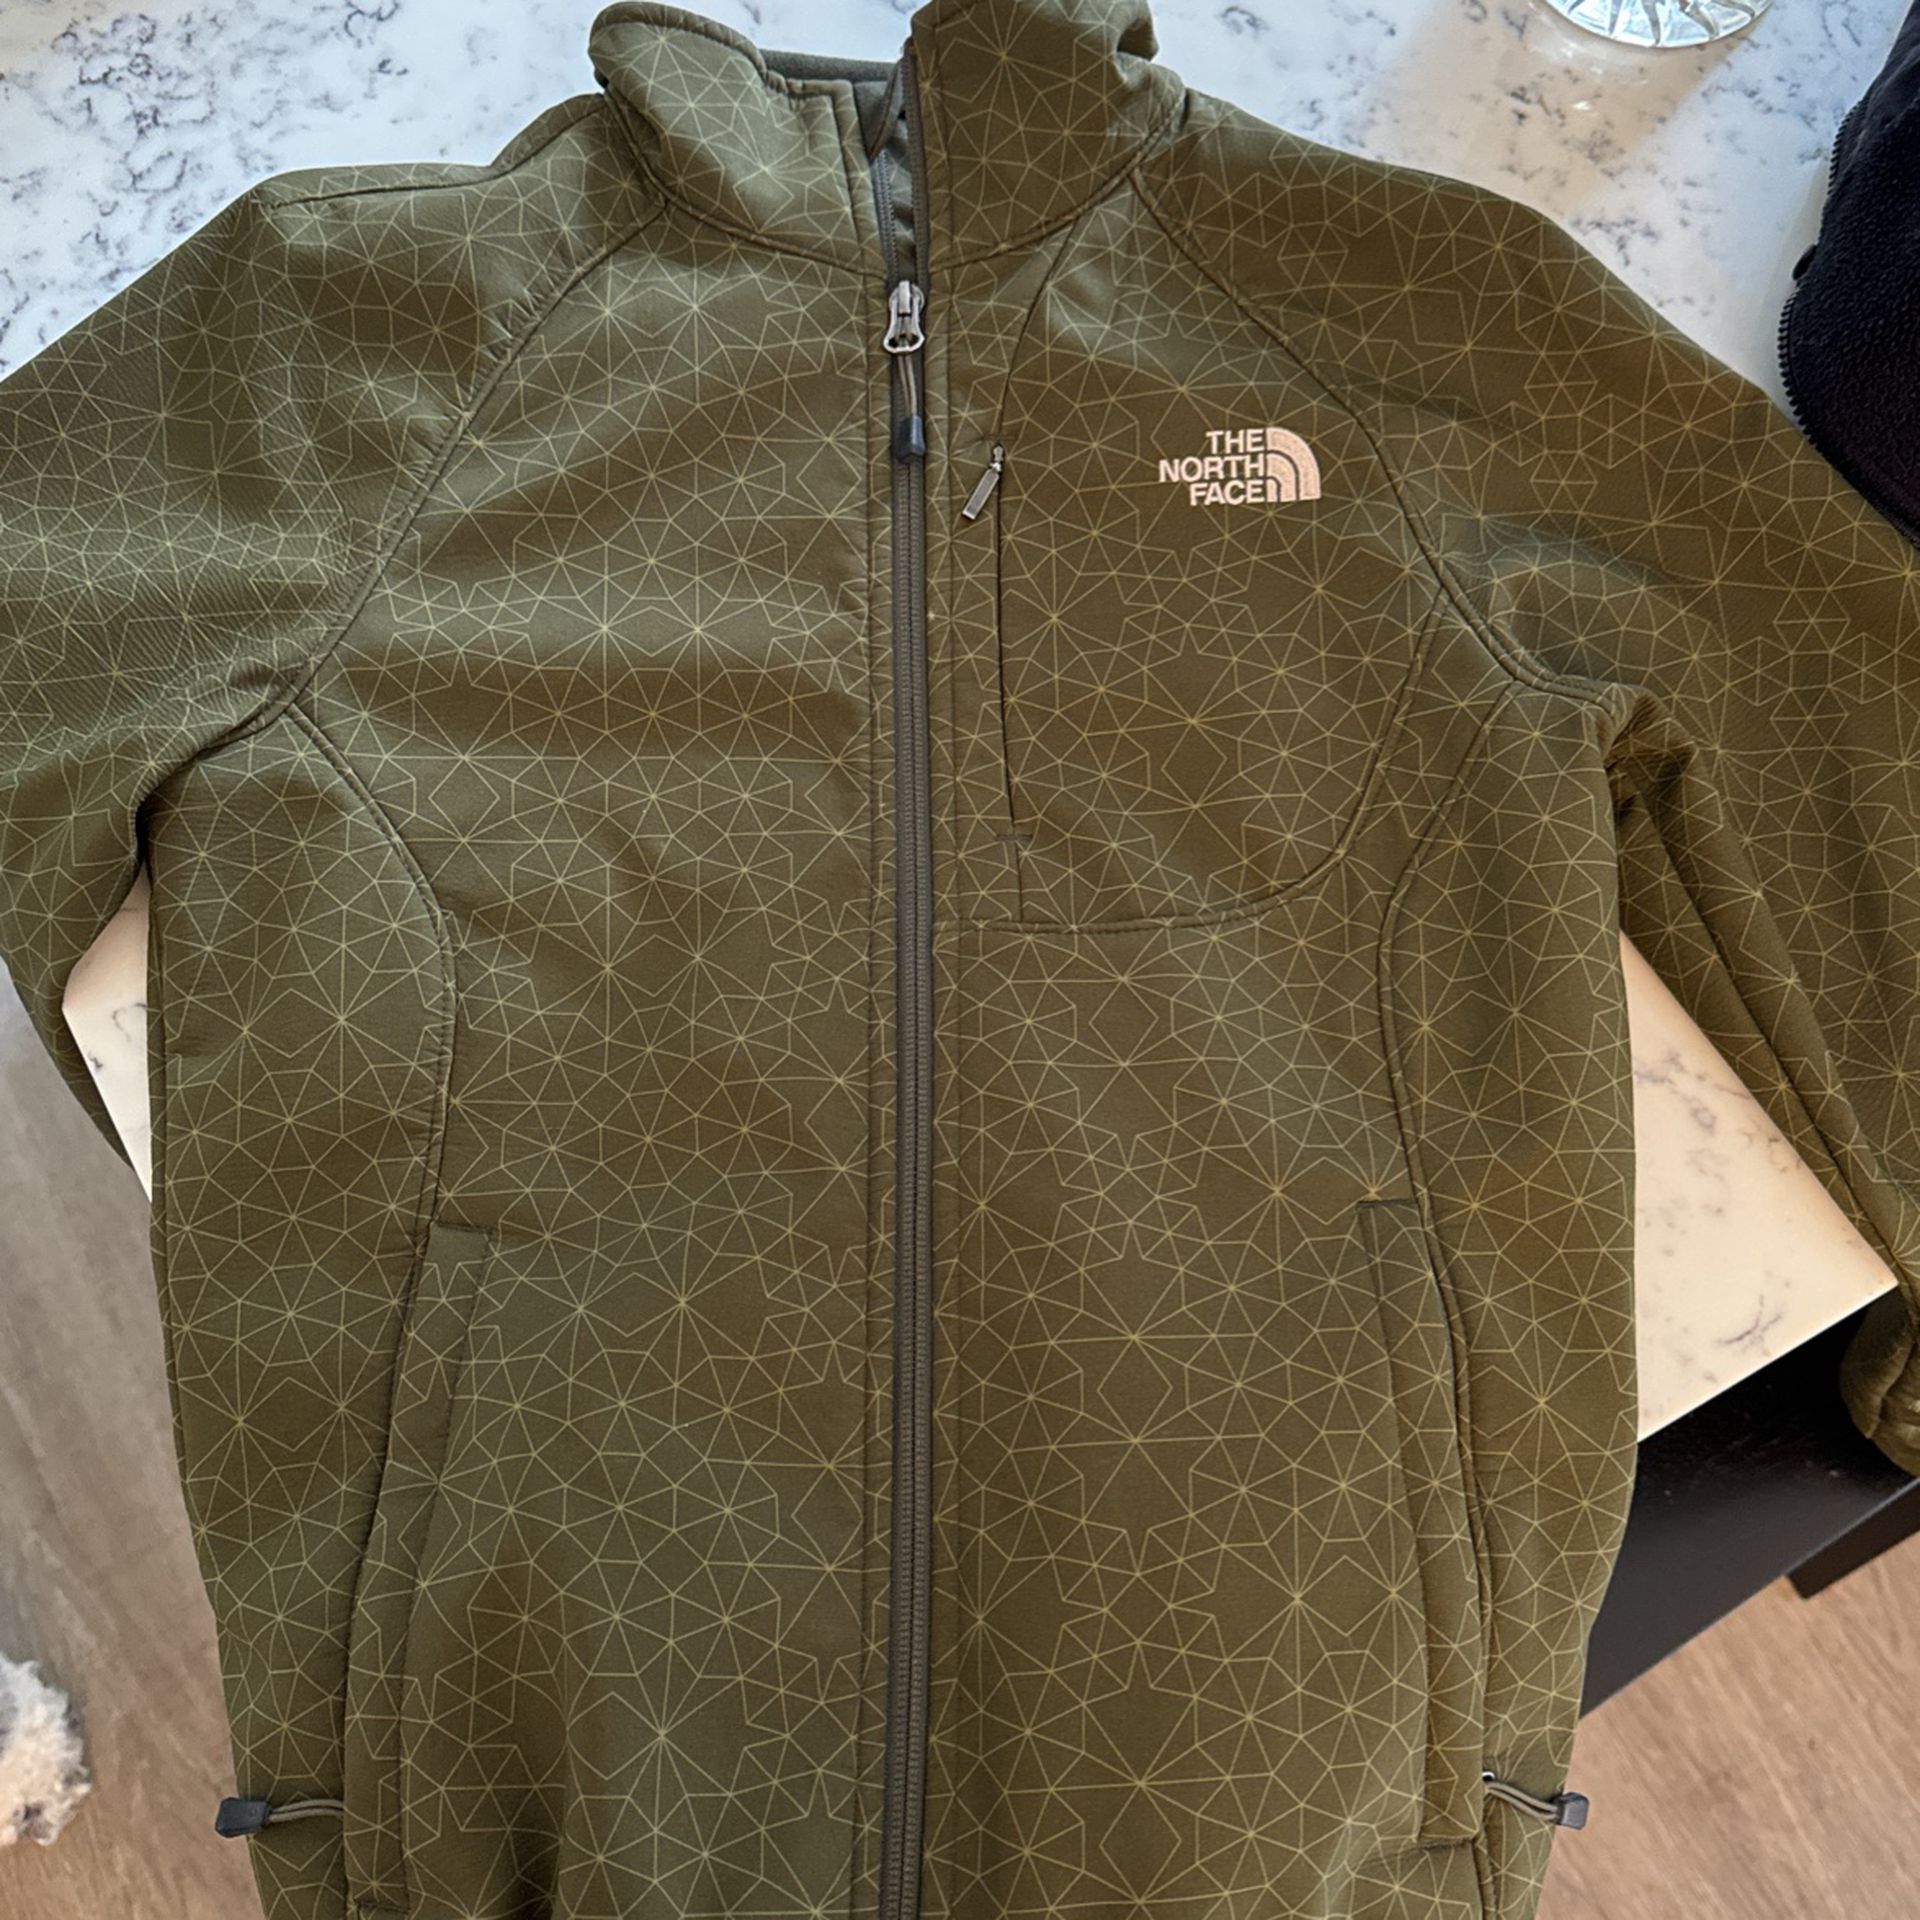 North face Women’s jacket 